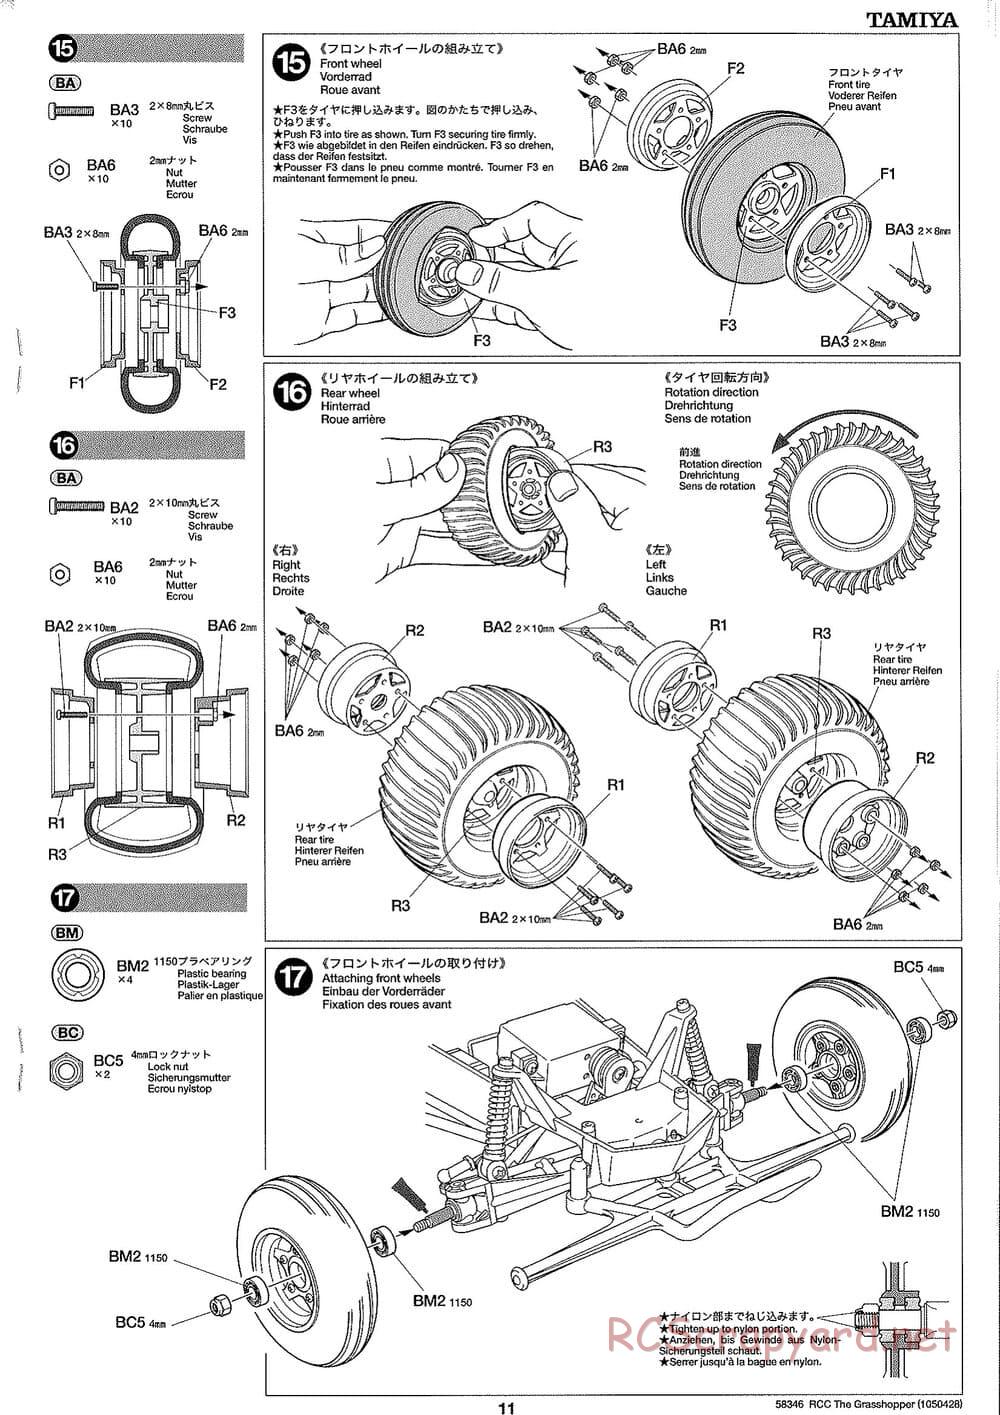 Tamiya - The Grasshopper (2005) - GH Chassis - Manual - Page 11